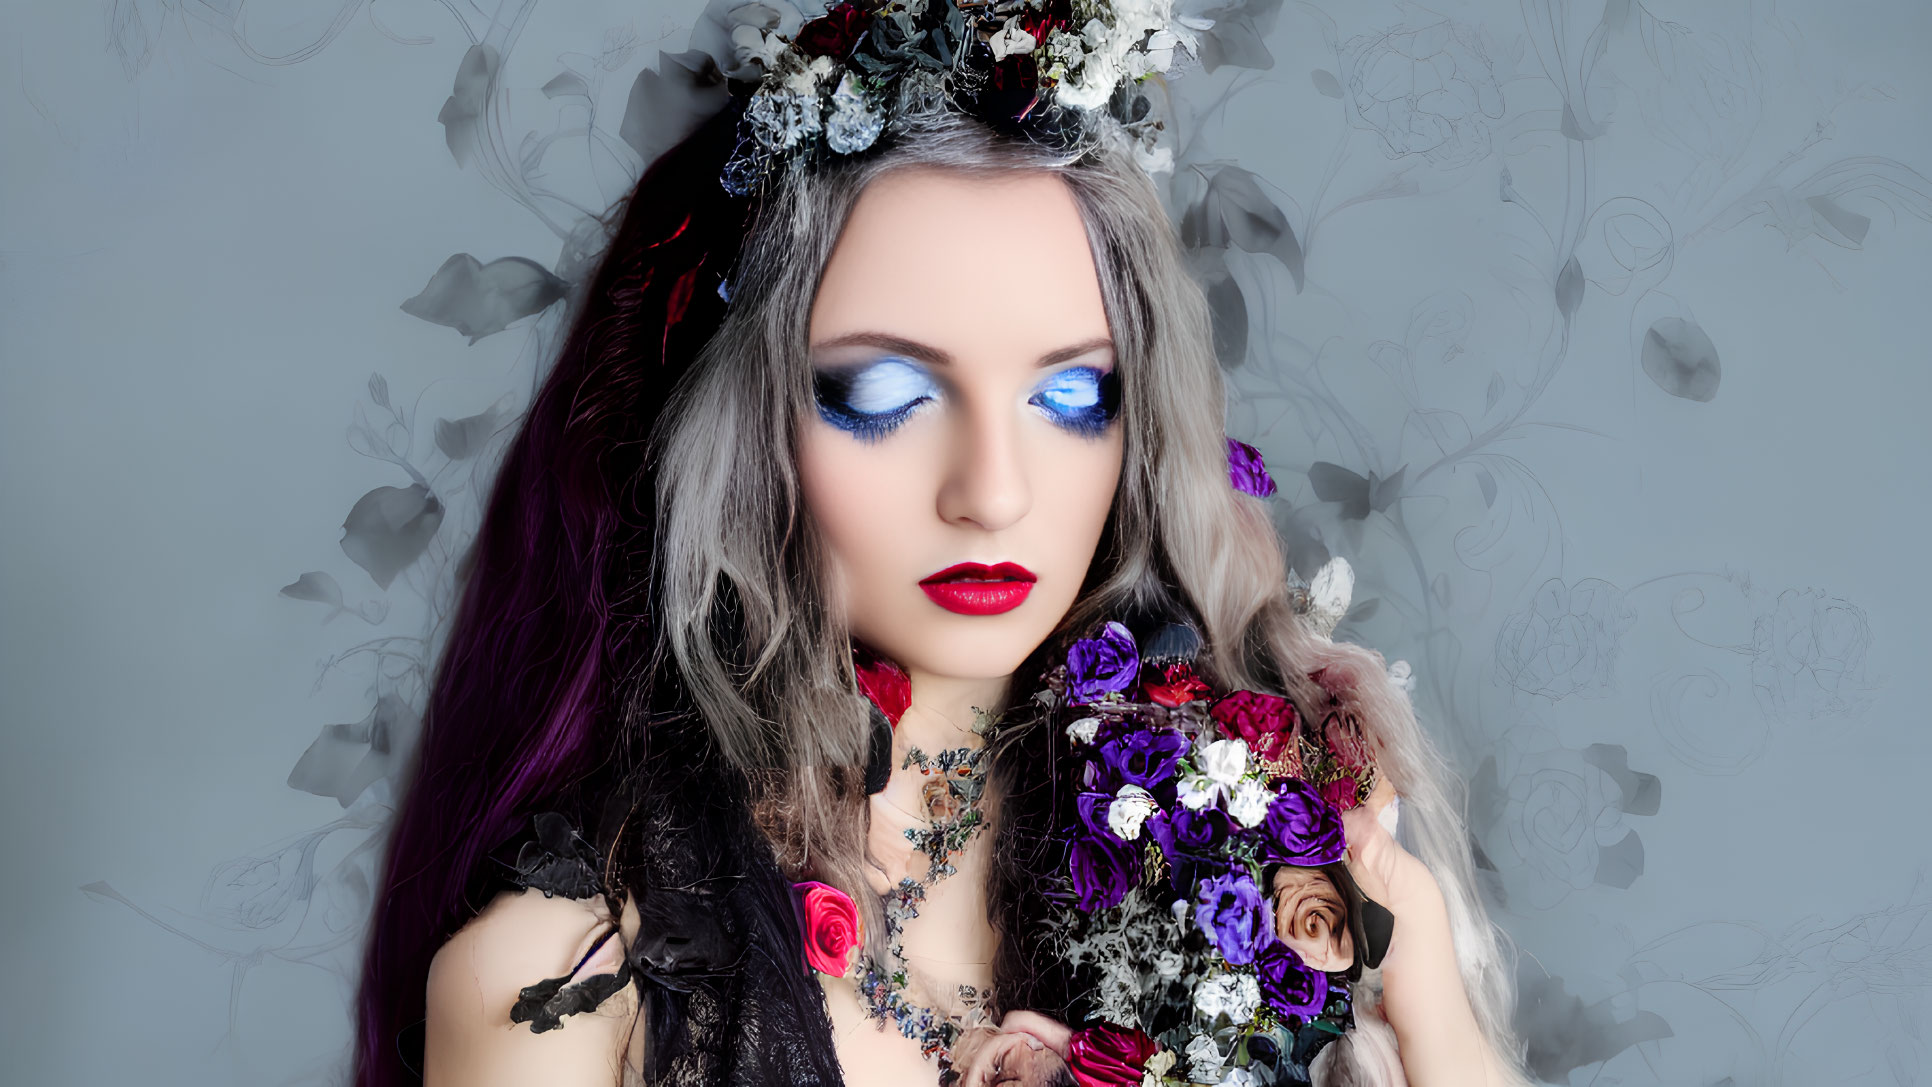 Woman with Blue Eye Makeup and Red Lipstick Holding Dark Roses in Floral Headpiece